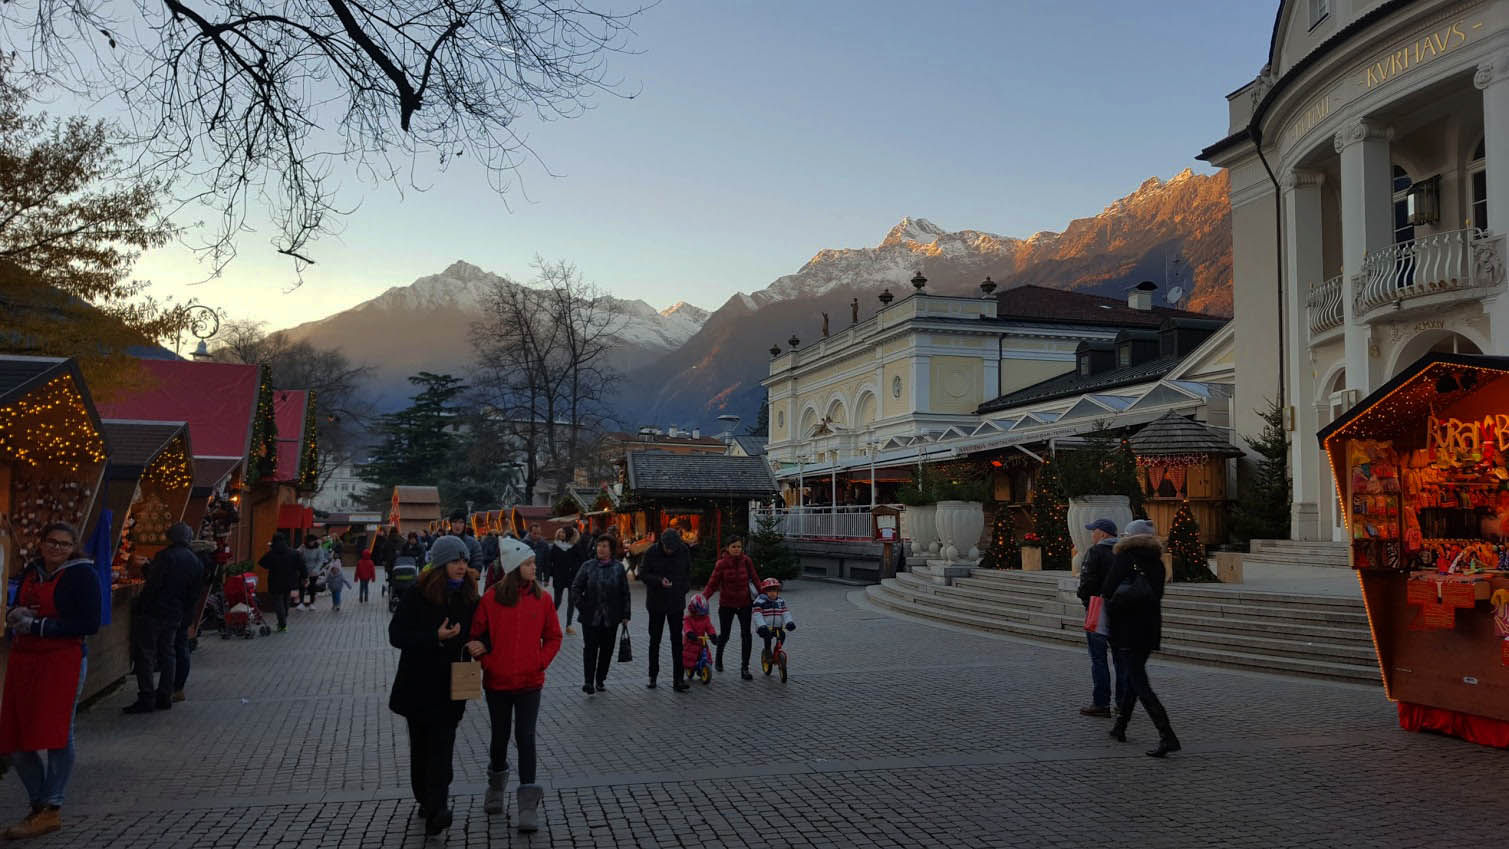 The Merano Christmas Market, Italy is one the lesser known Christmas markets in Europe. Check out this article and discover the best Christmas Markets in Europe. #christmas #christmasholidays #christmastrips #europemarkets #europechristmasmarkets #christmasmarkets 